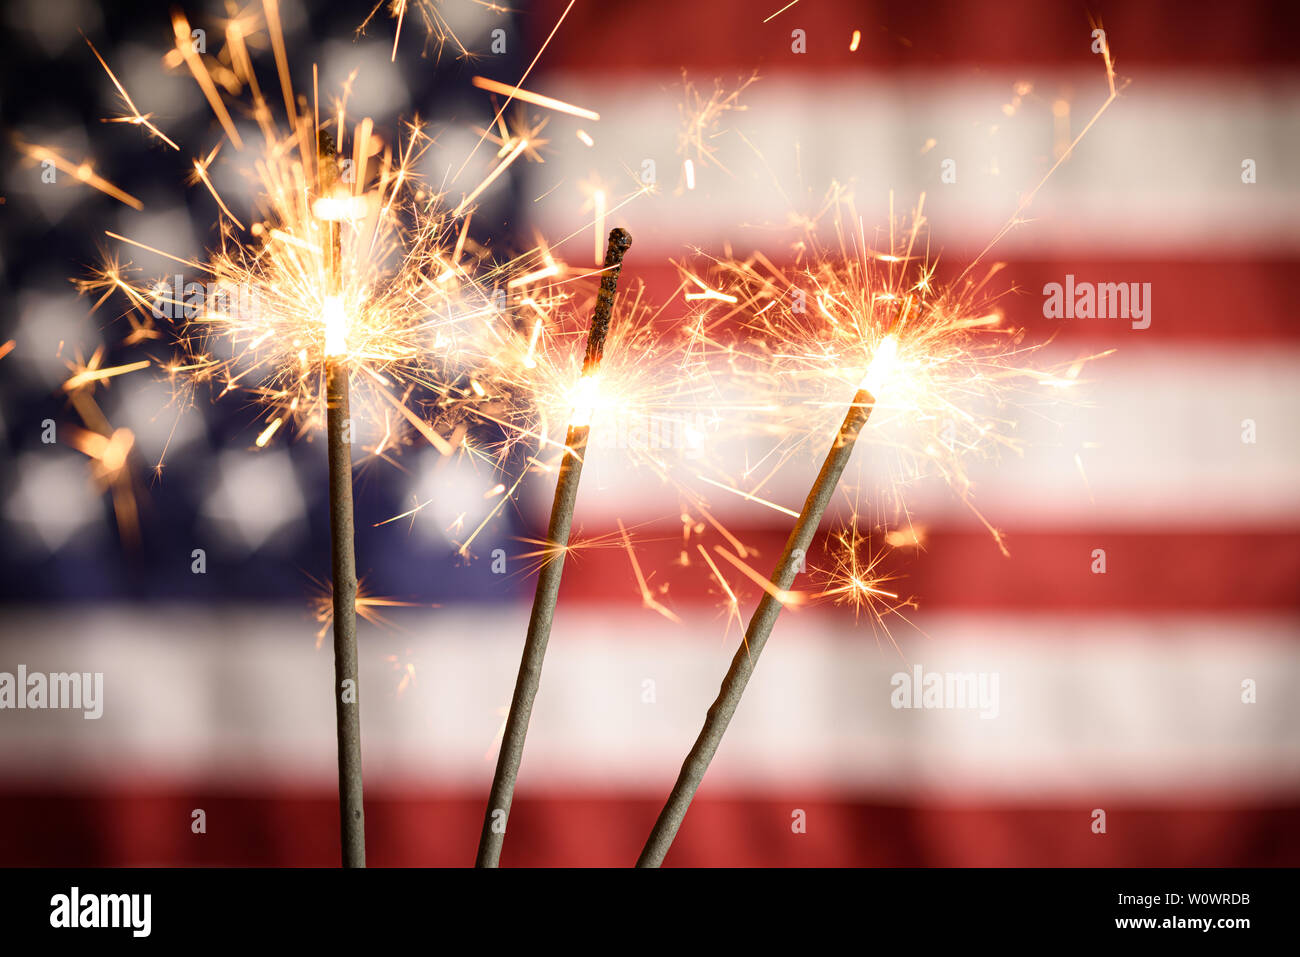 Sparklers Closeup With American Flag In Background. Celebrating 4th Of July Independence Day Stock Photo